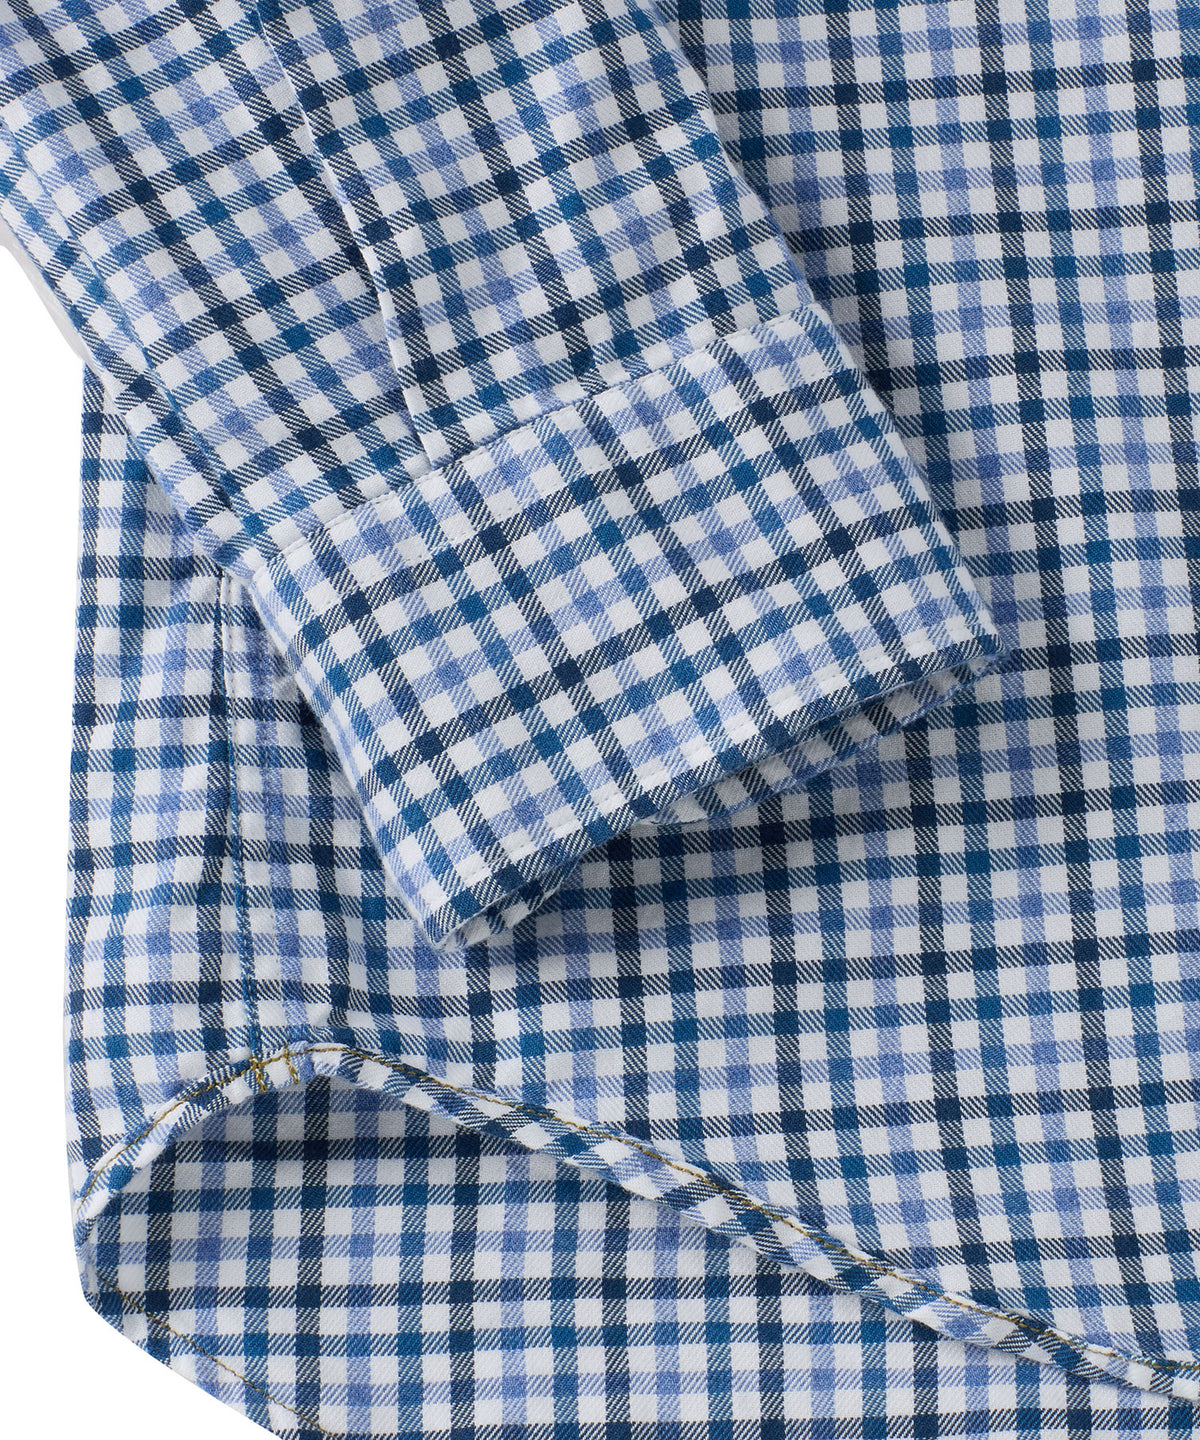 Combed Cotton Check Sport Shirt